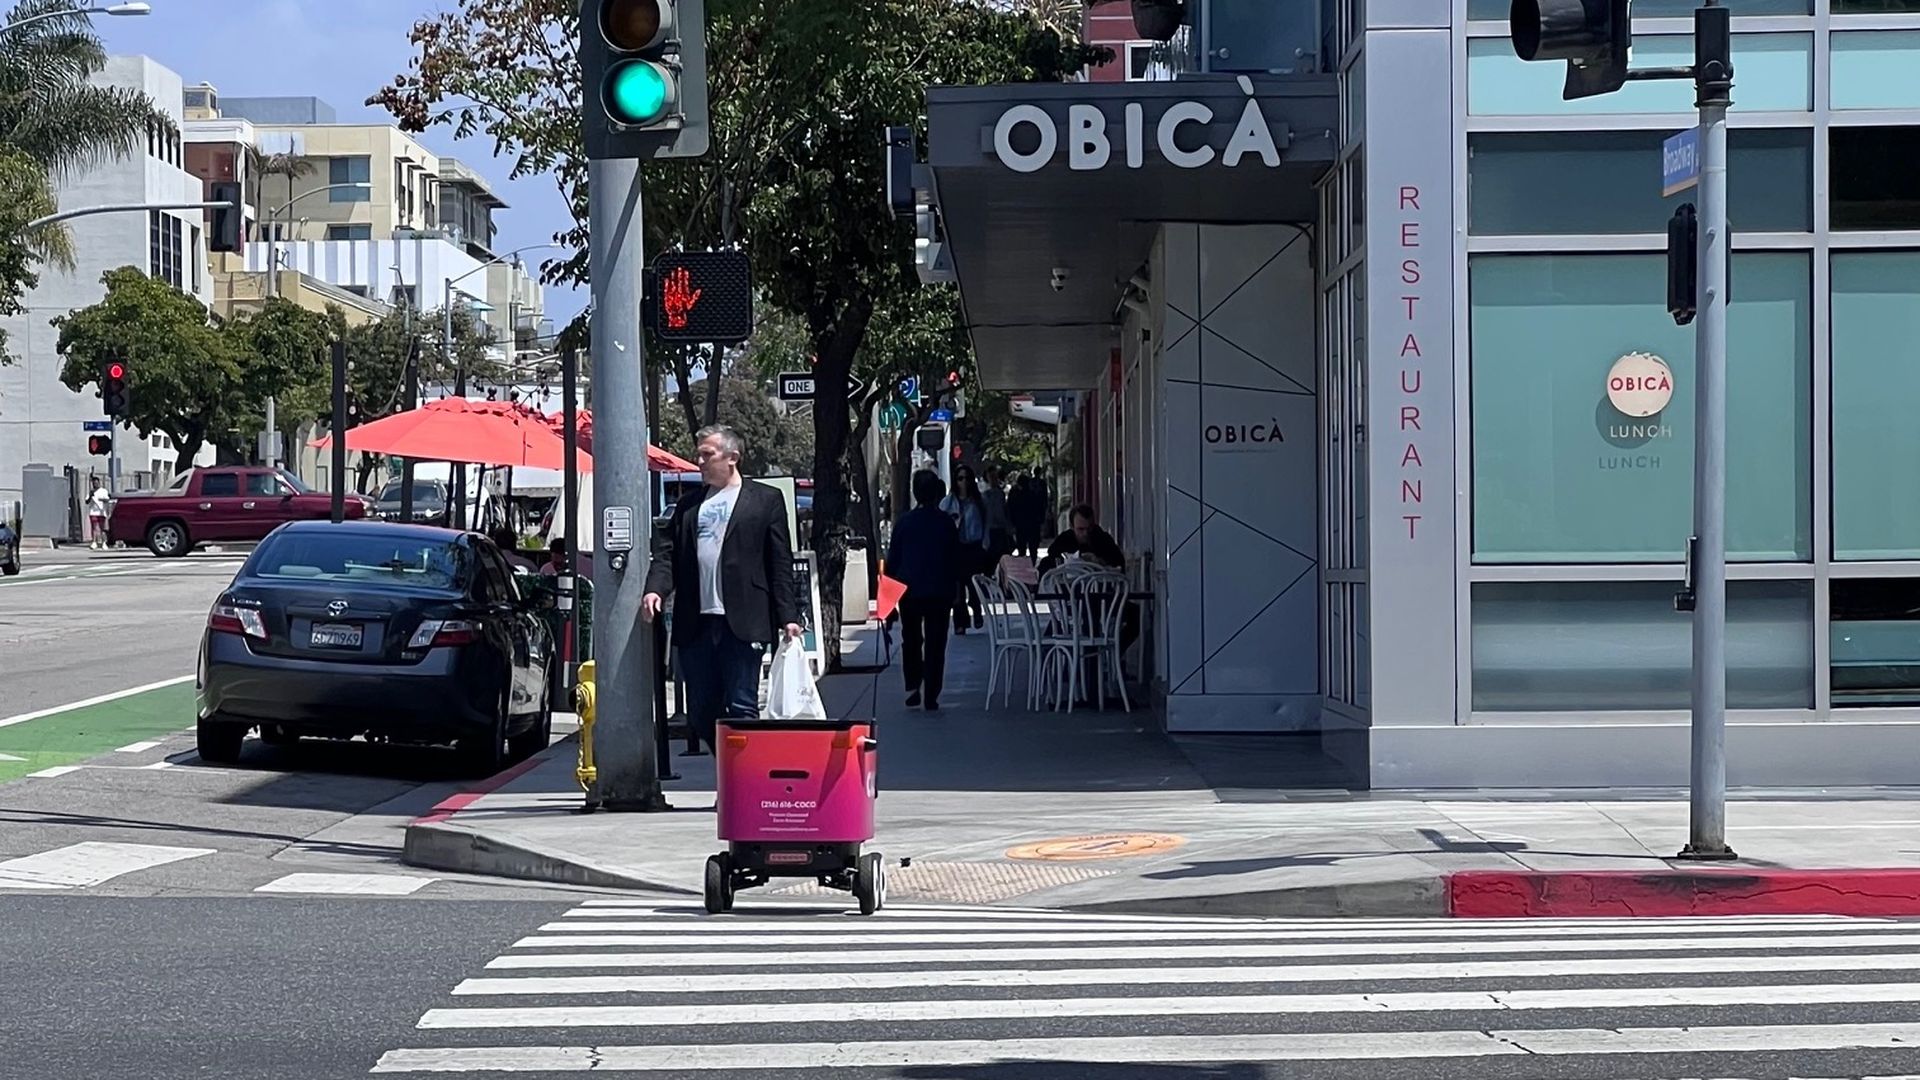 A delivery robot crosses the street